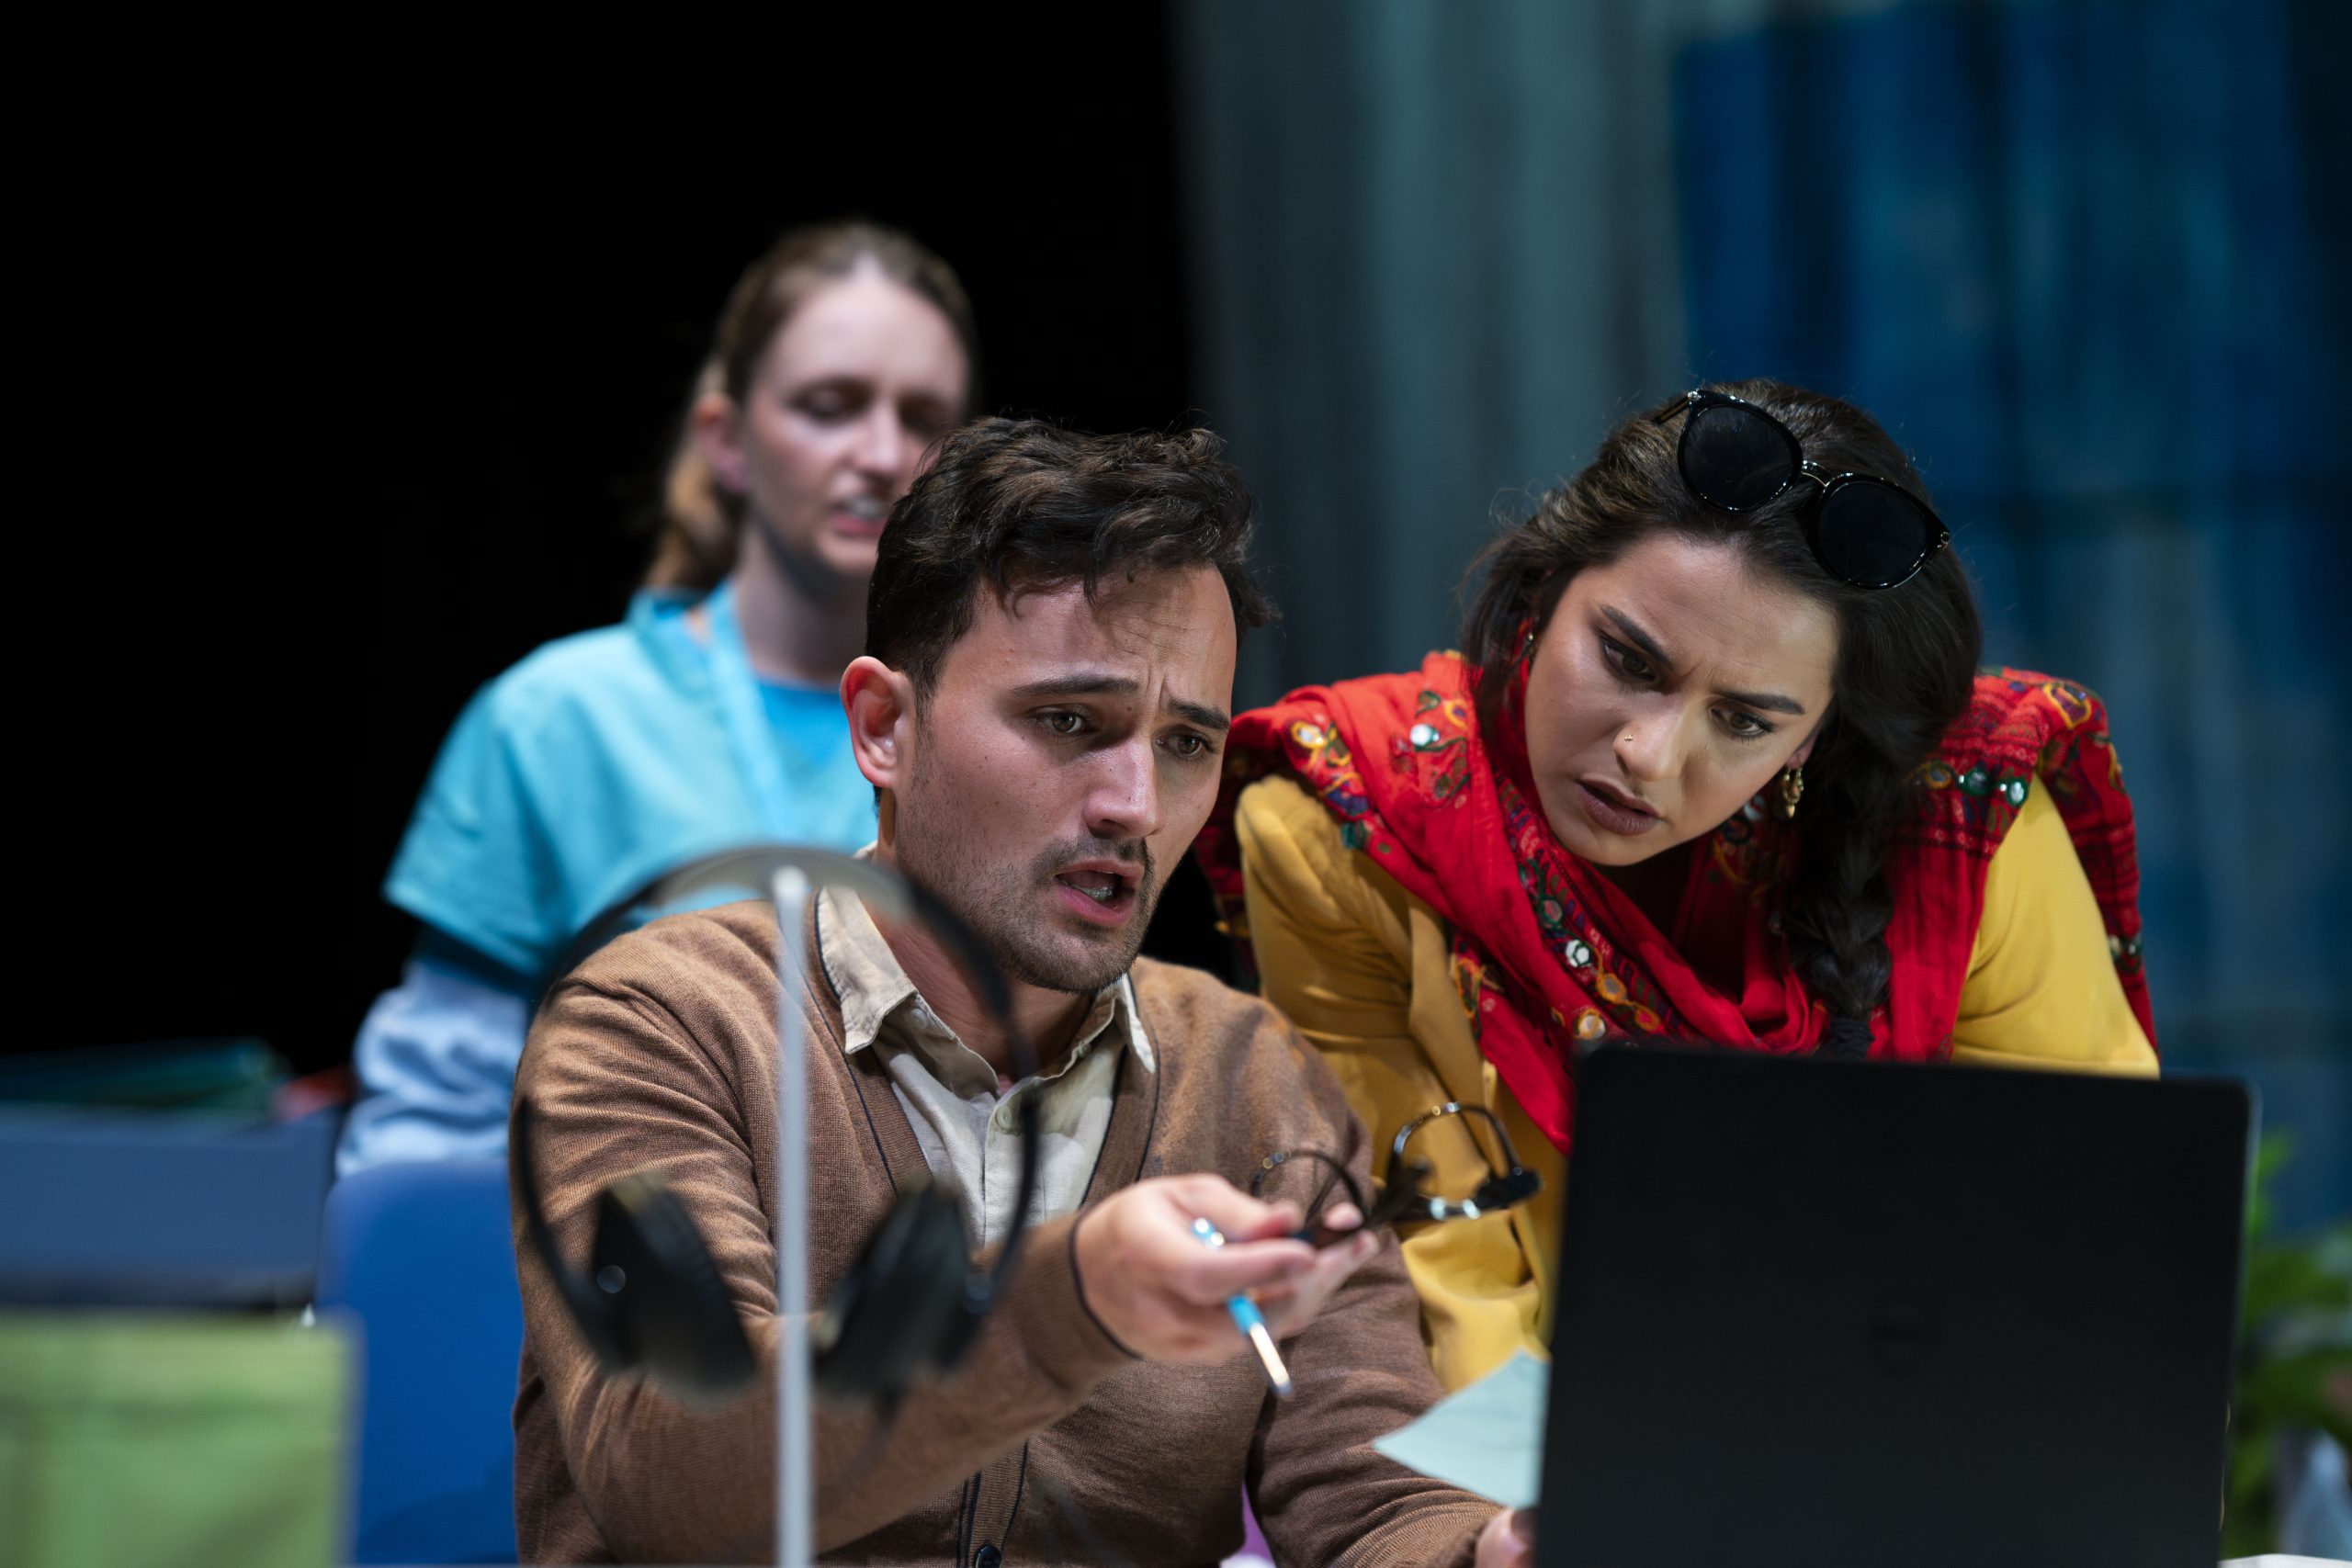 Actor Justin Rogers sits looking confused at his laptop while holding a pen out. Tessa Rao stands looking at a piece of paper in Justin's hand. Catherine Yates is seen blurred in the background